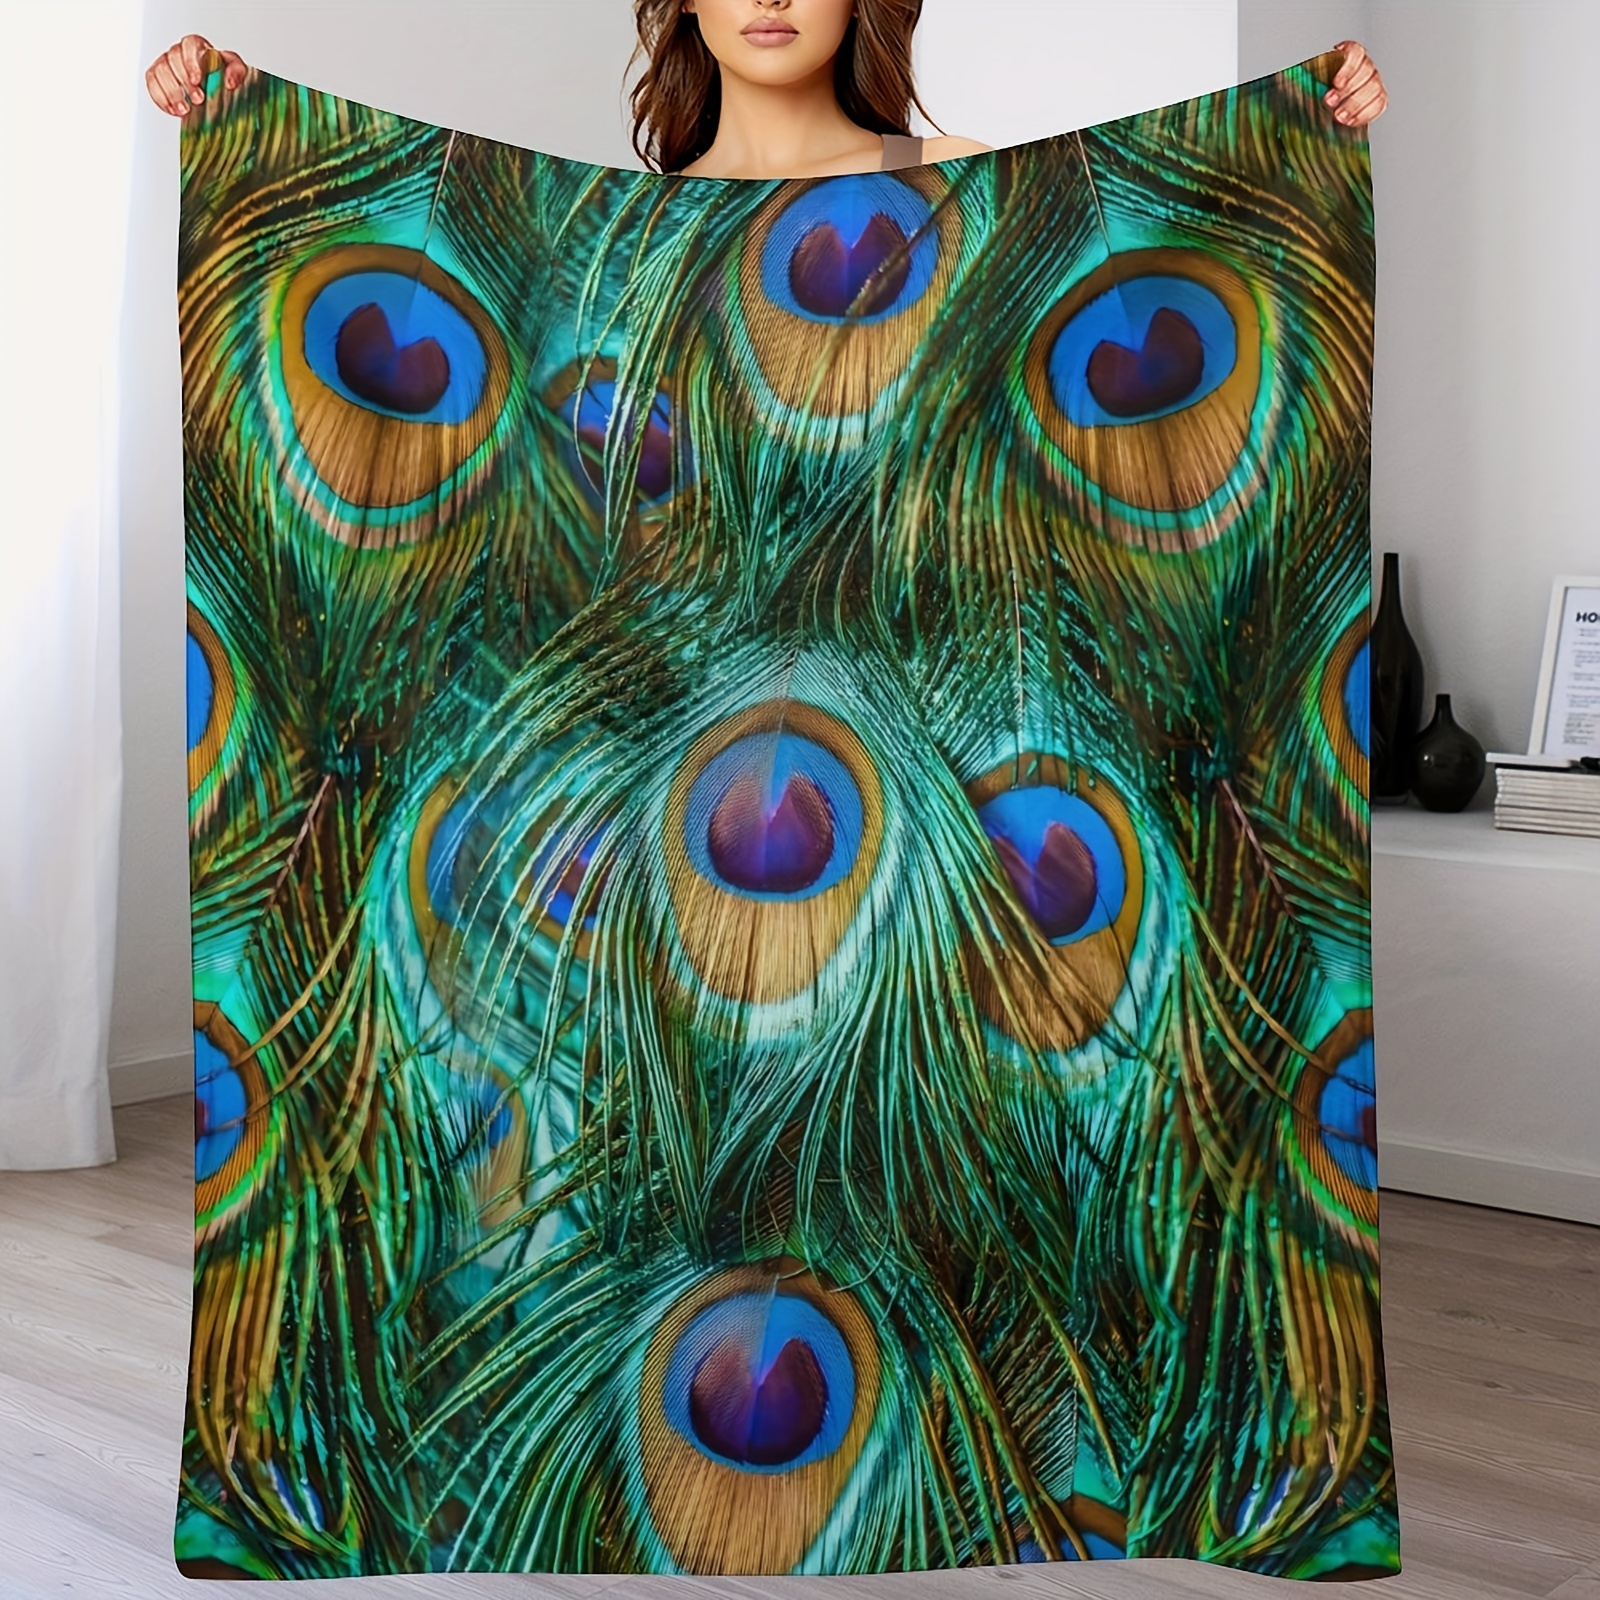 

Peacock Feathers Blanket Gifts For Girls Women Men Decor For Car, Home Bedroom Living Room Sofa Office, Soft Cozy Fuzzy Lightweight Throw Plush Blankets Green Twin